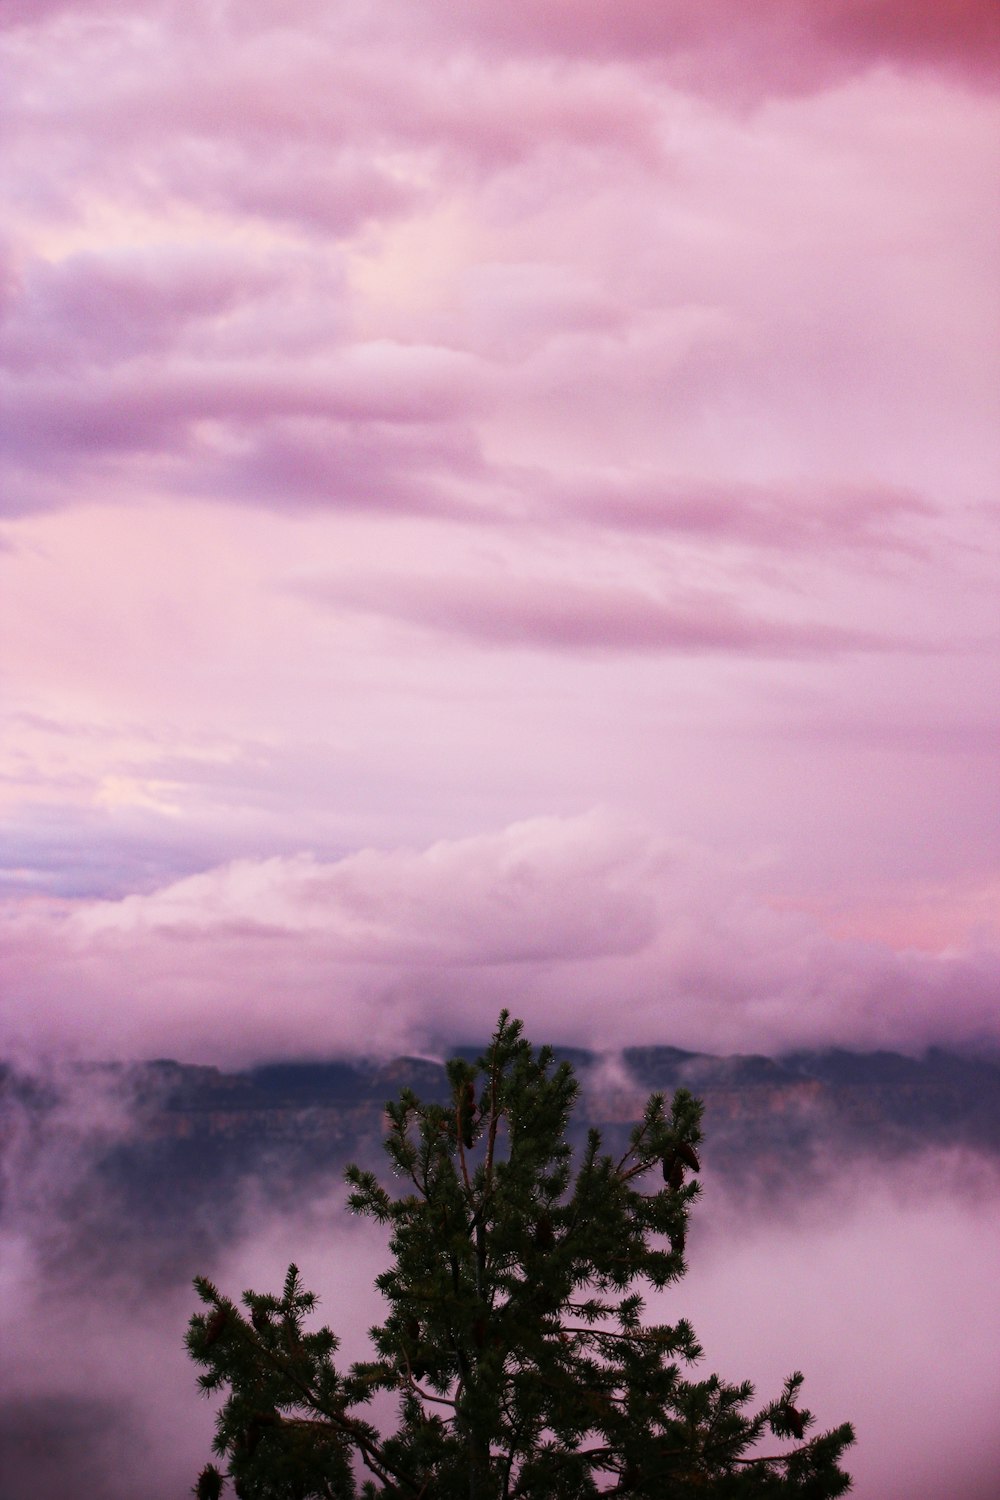 a pine tree in the foreground with a pink sky in the background